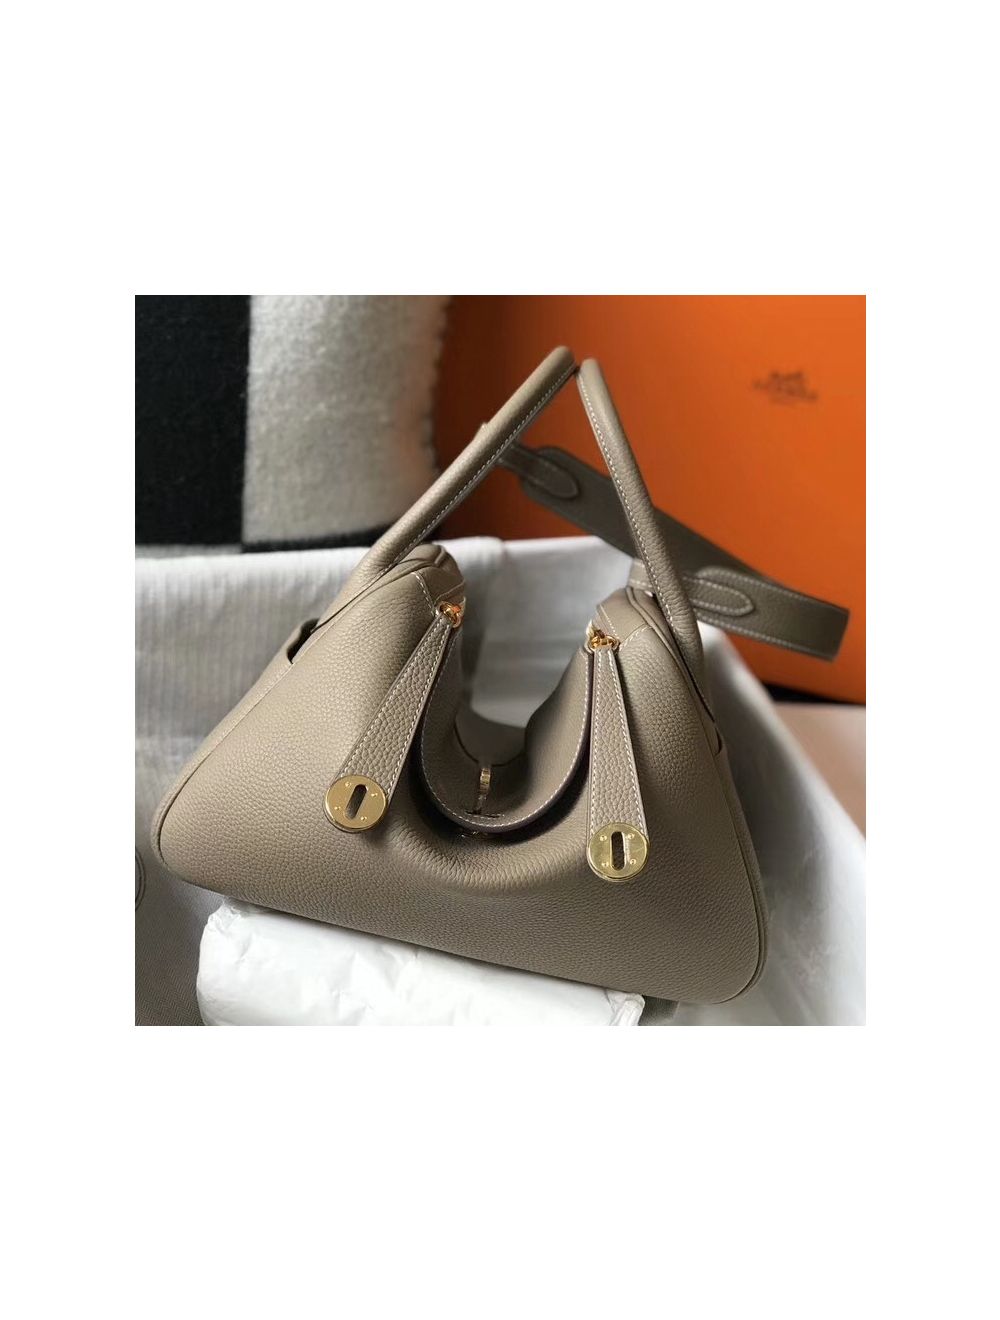 HERMES Taurillon Clemence Lindy 30 Etoupe 1238160